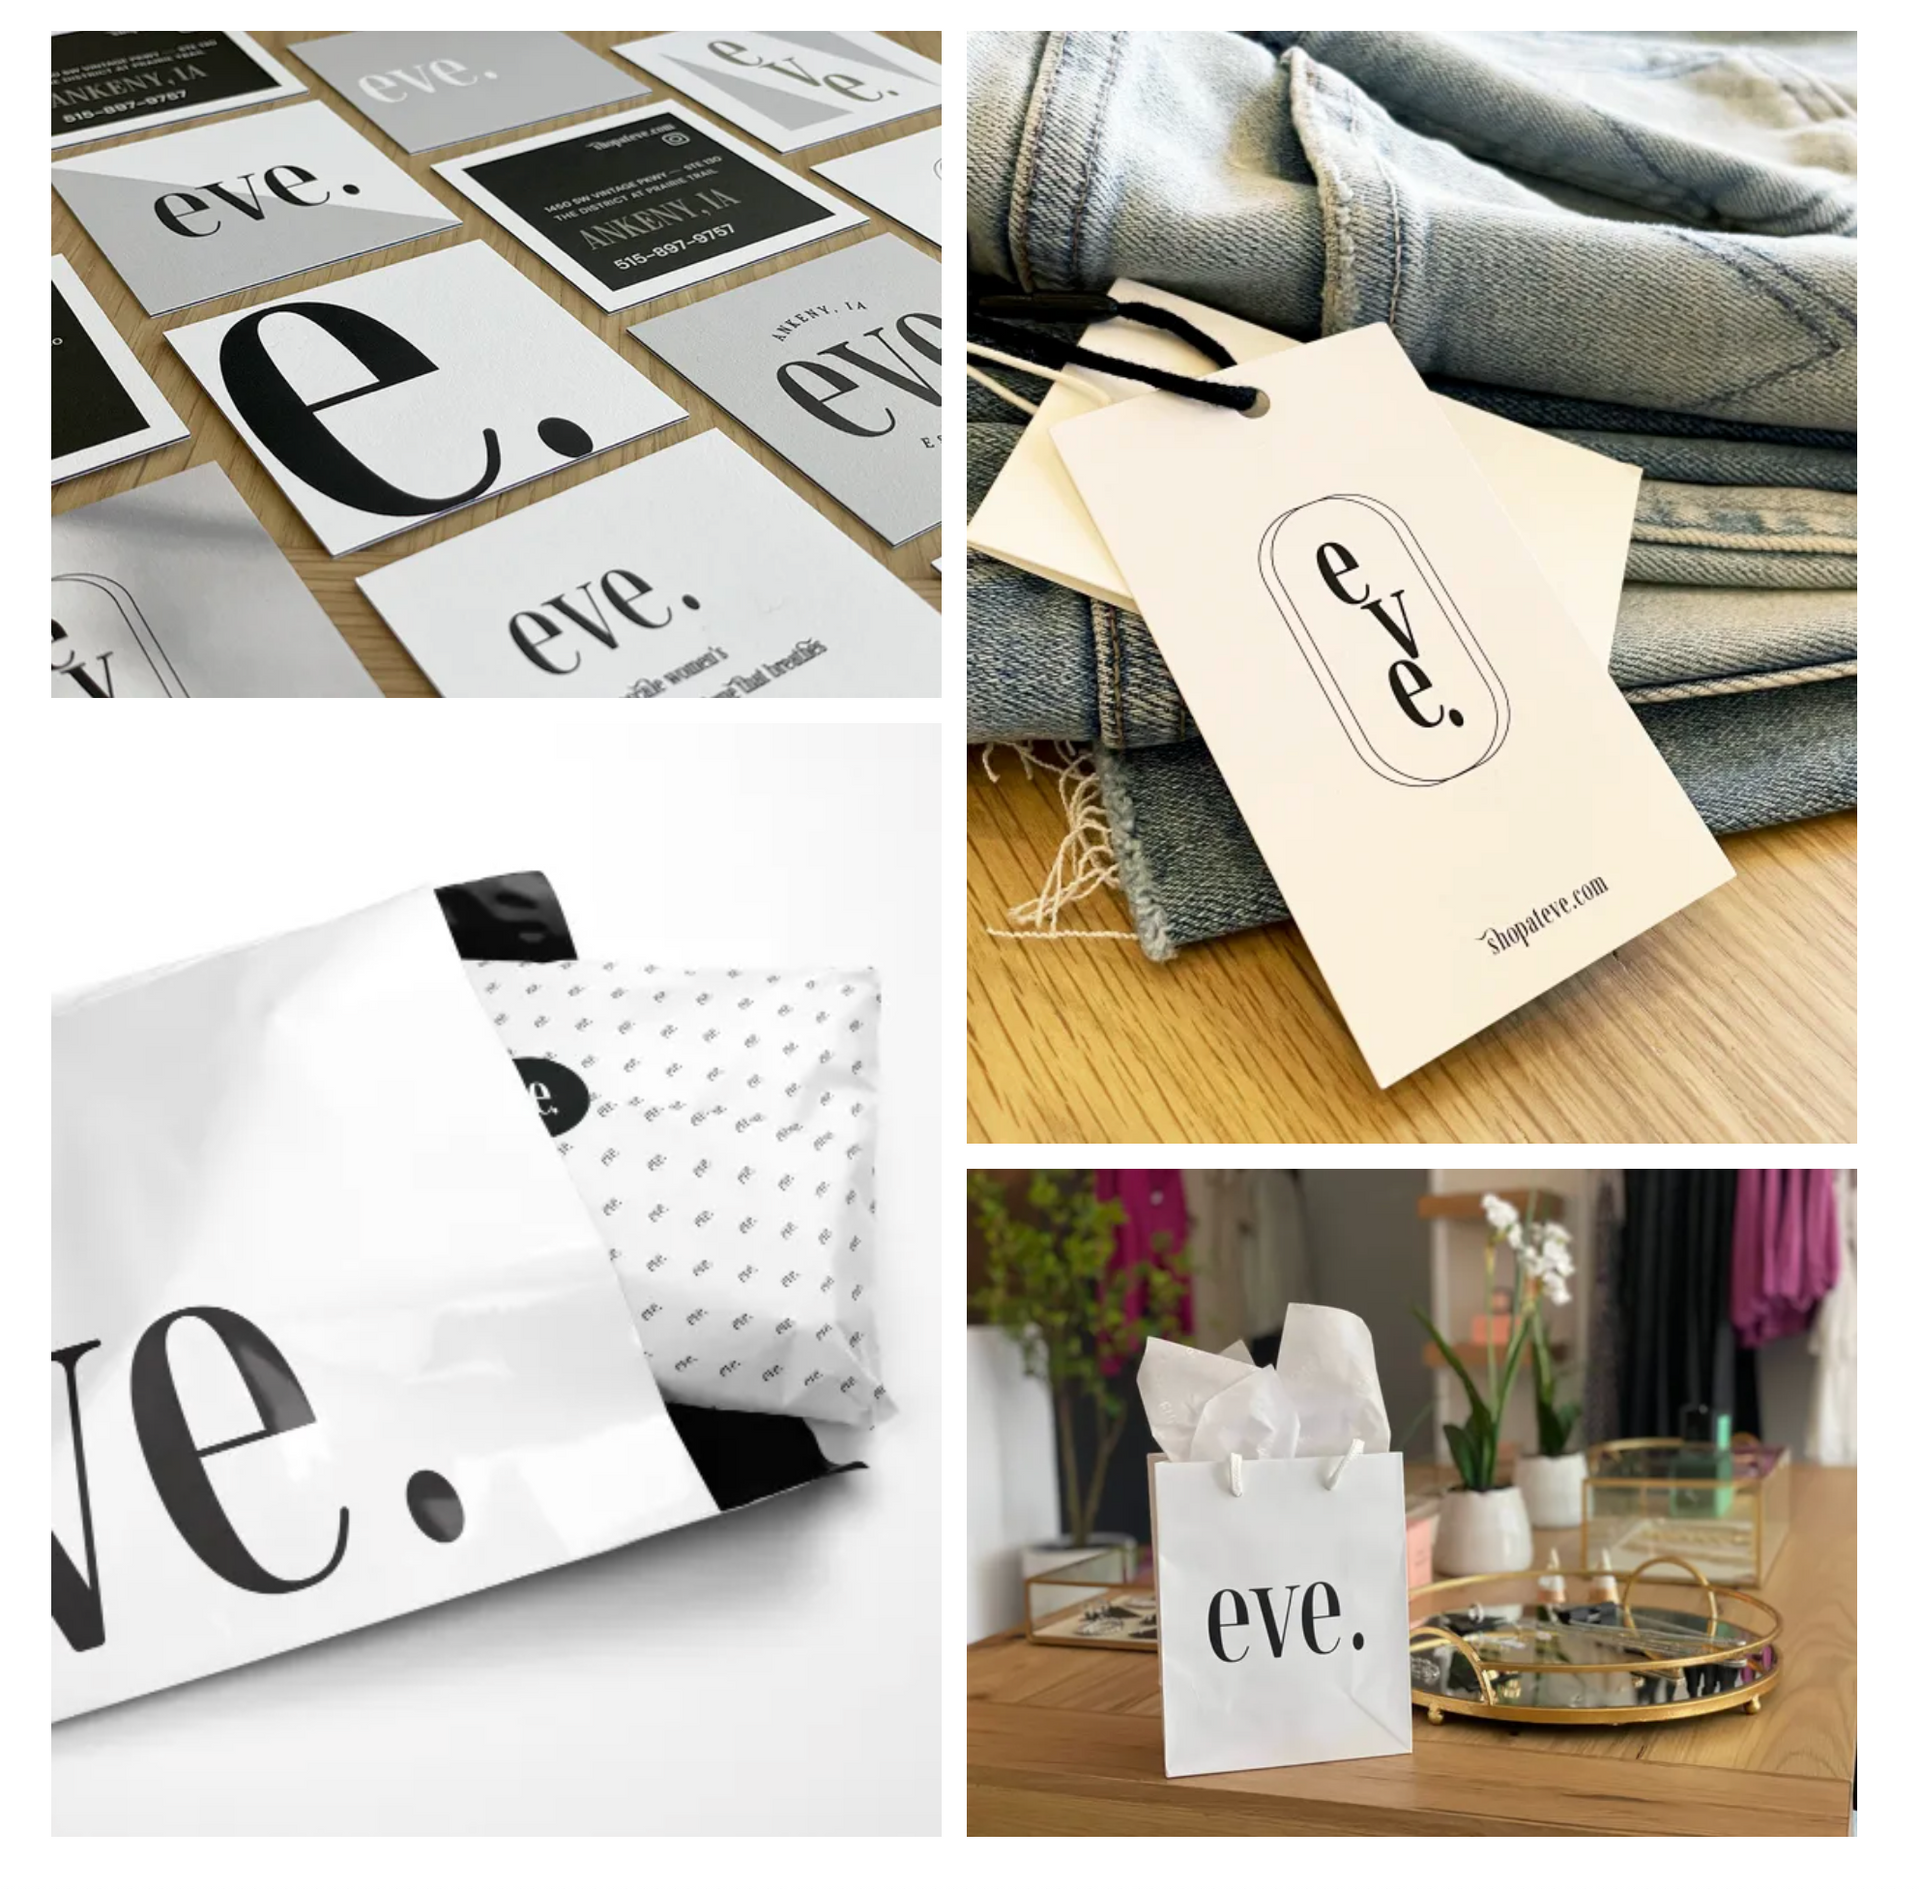 Store apparel tags, shopping bags